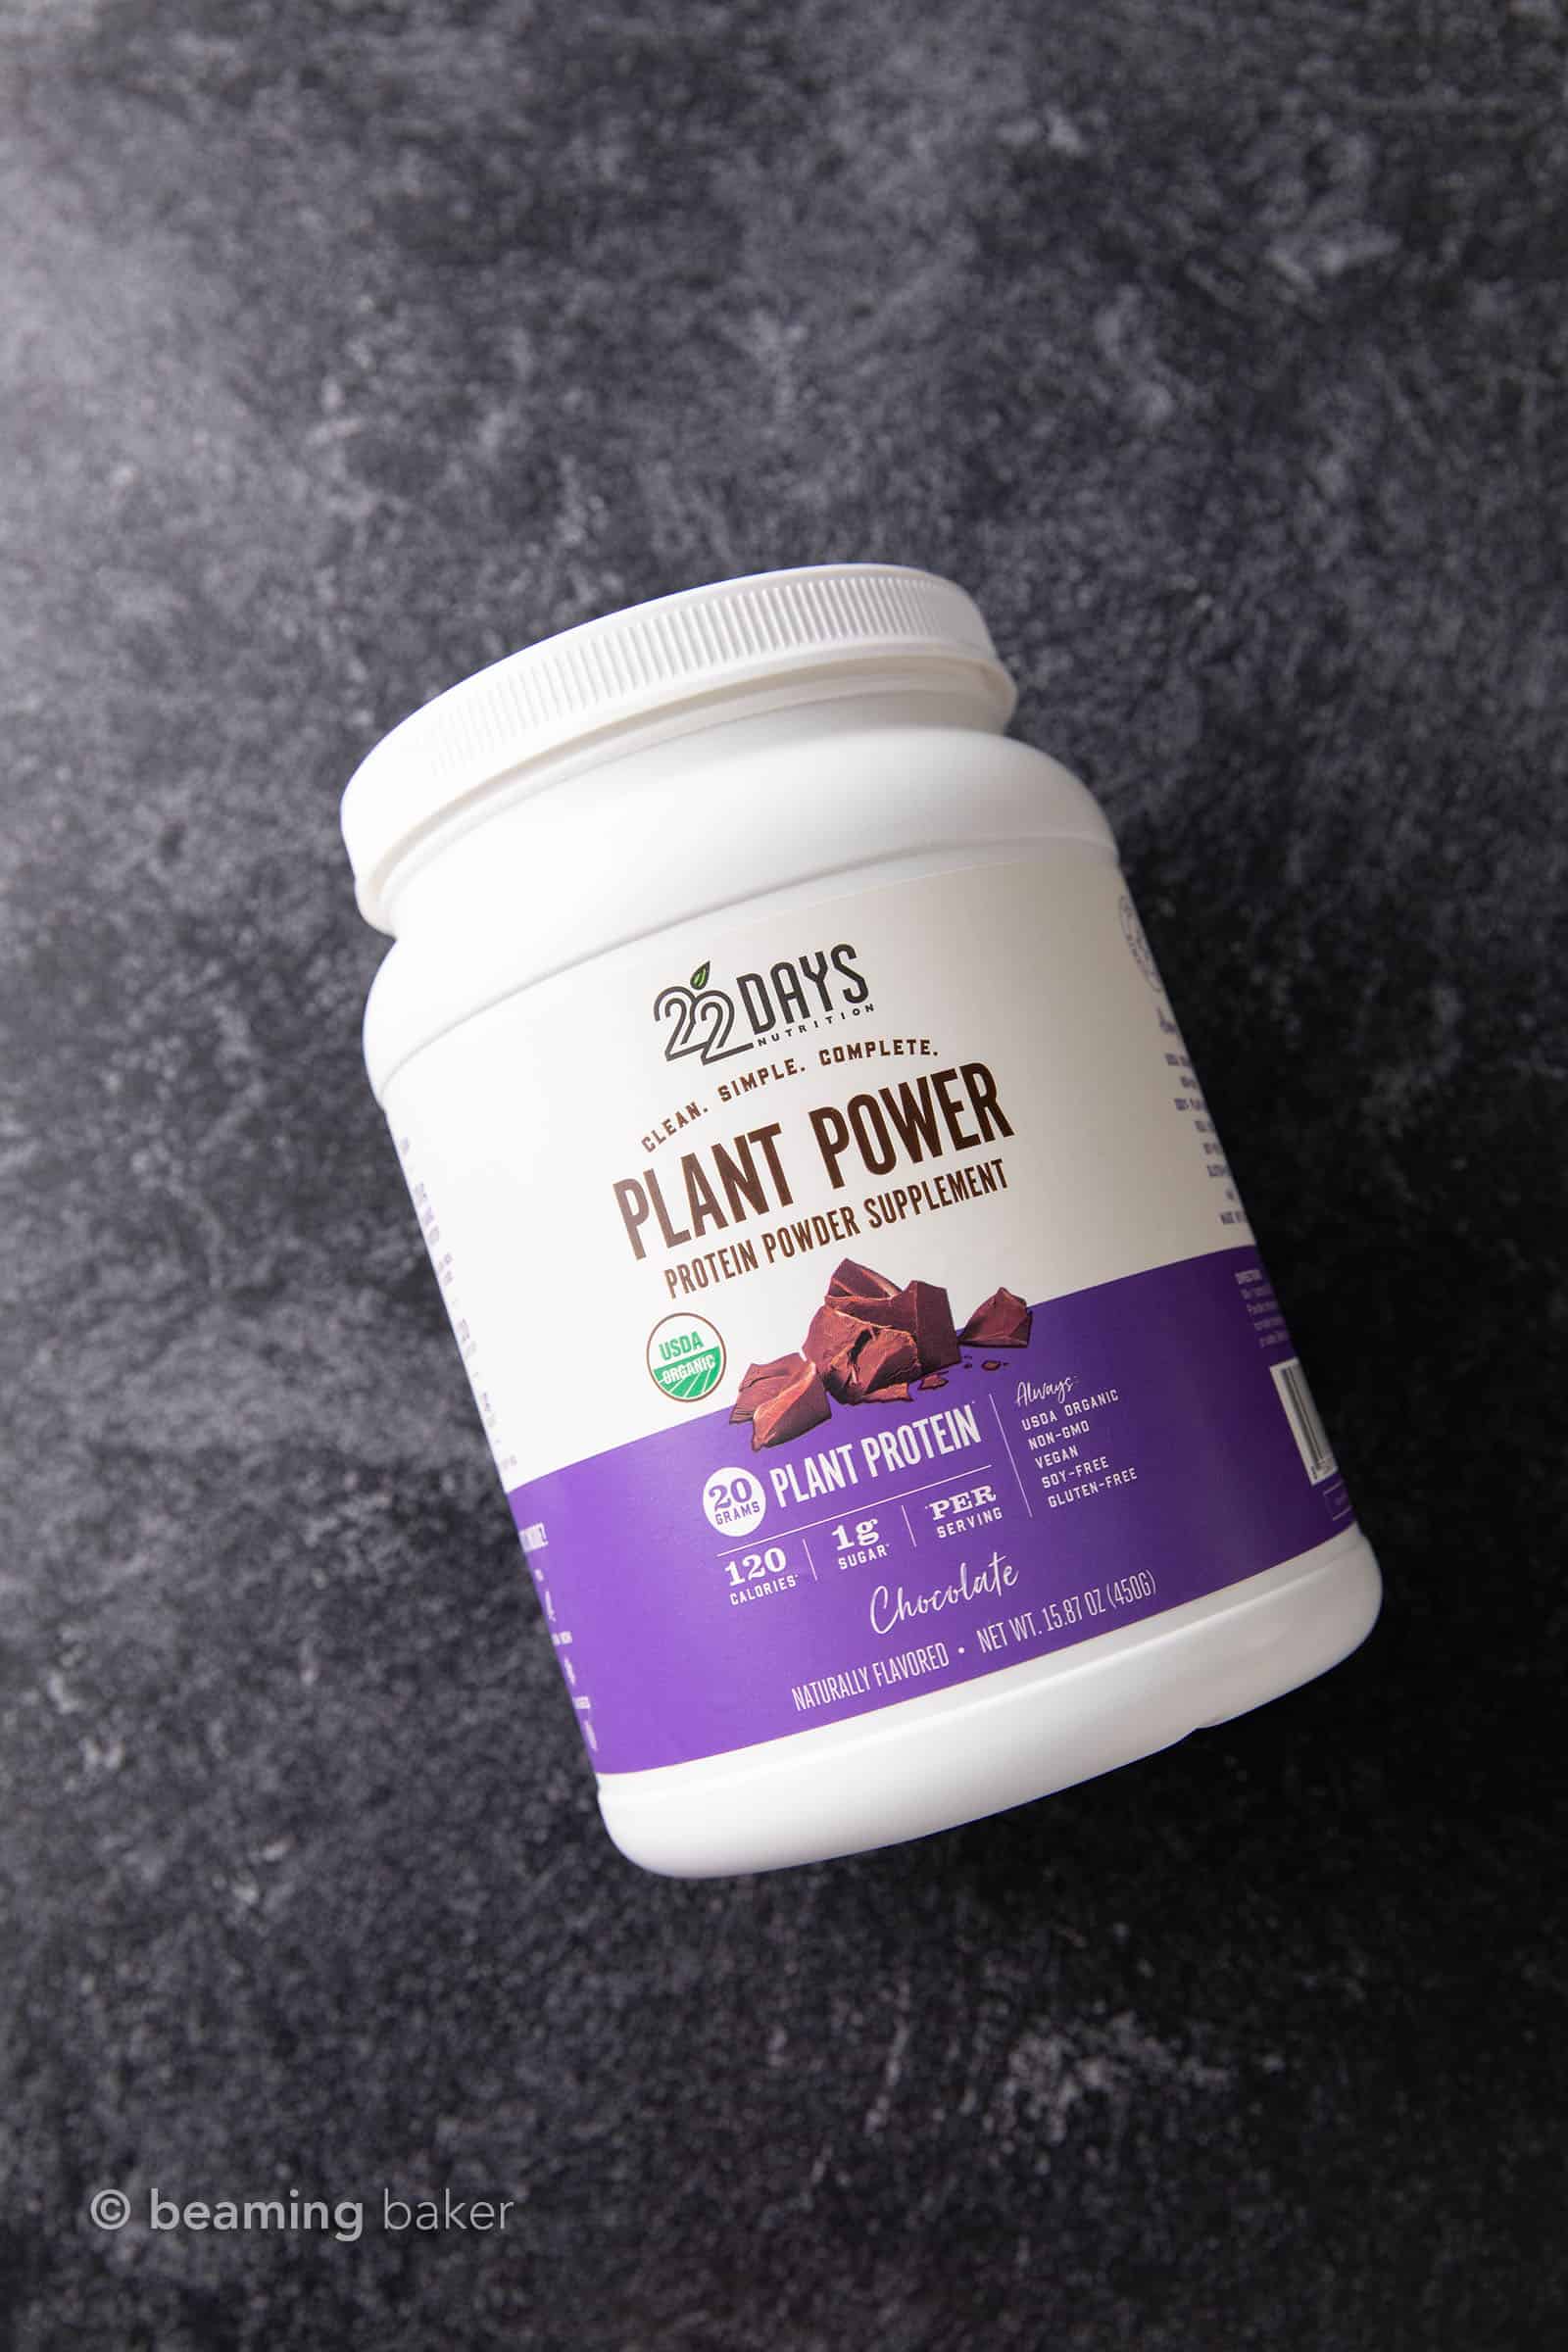 Container of 22 Days Nutrition vegan chocolate protein powder on grey background